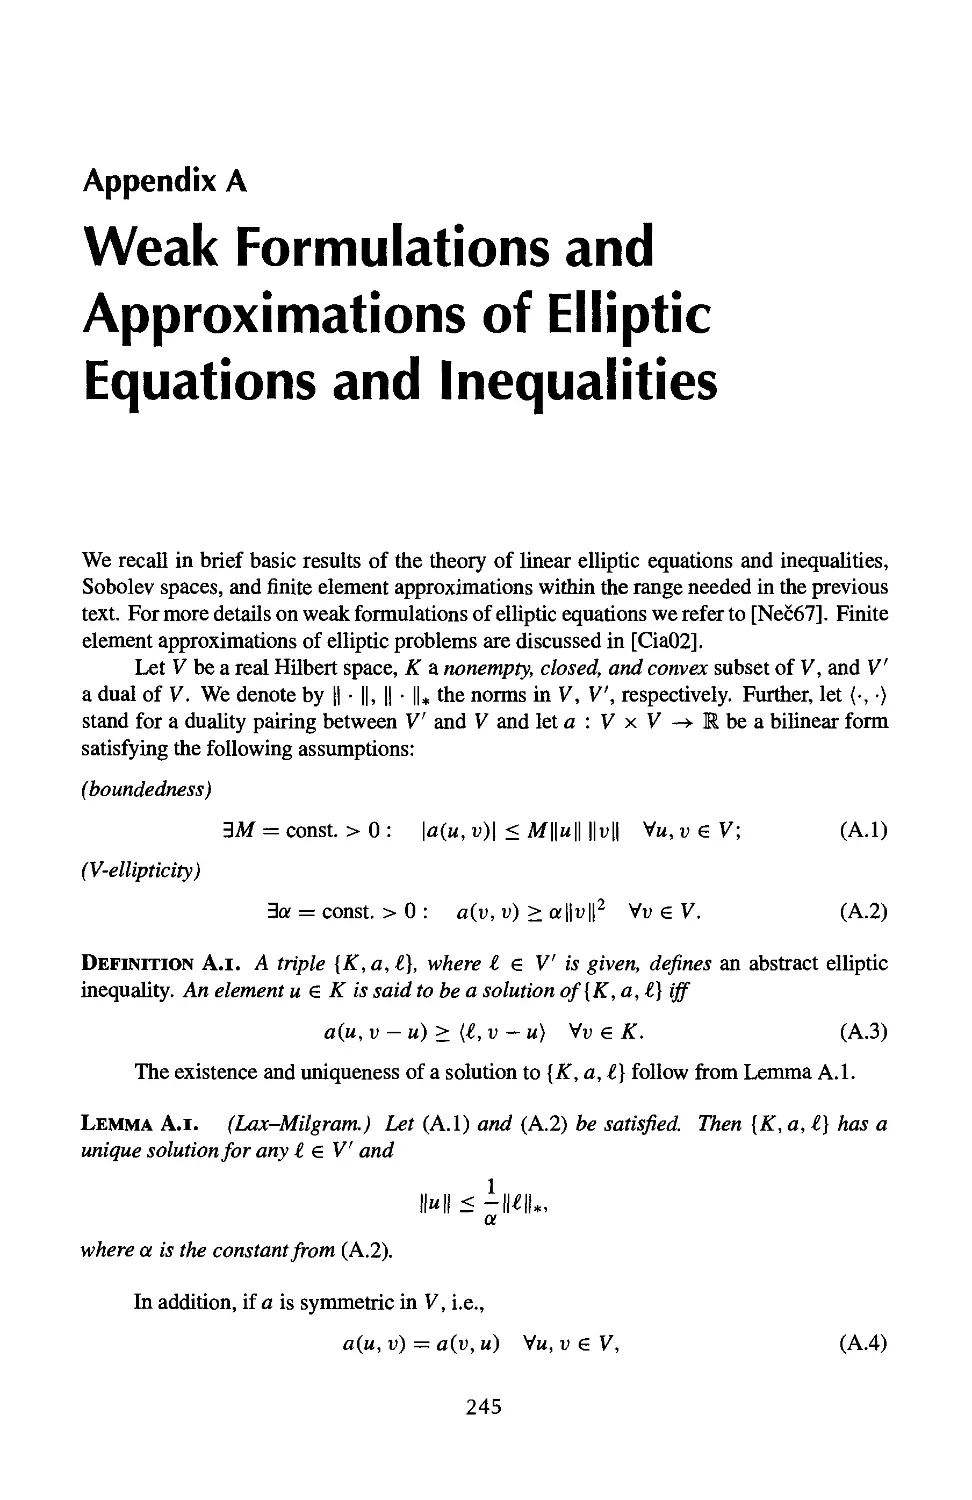 Appendix A Weak Formulations and Approximations of Elliptic Equations and Inequalities